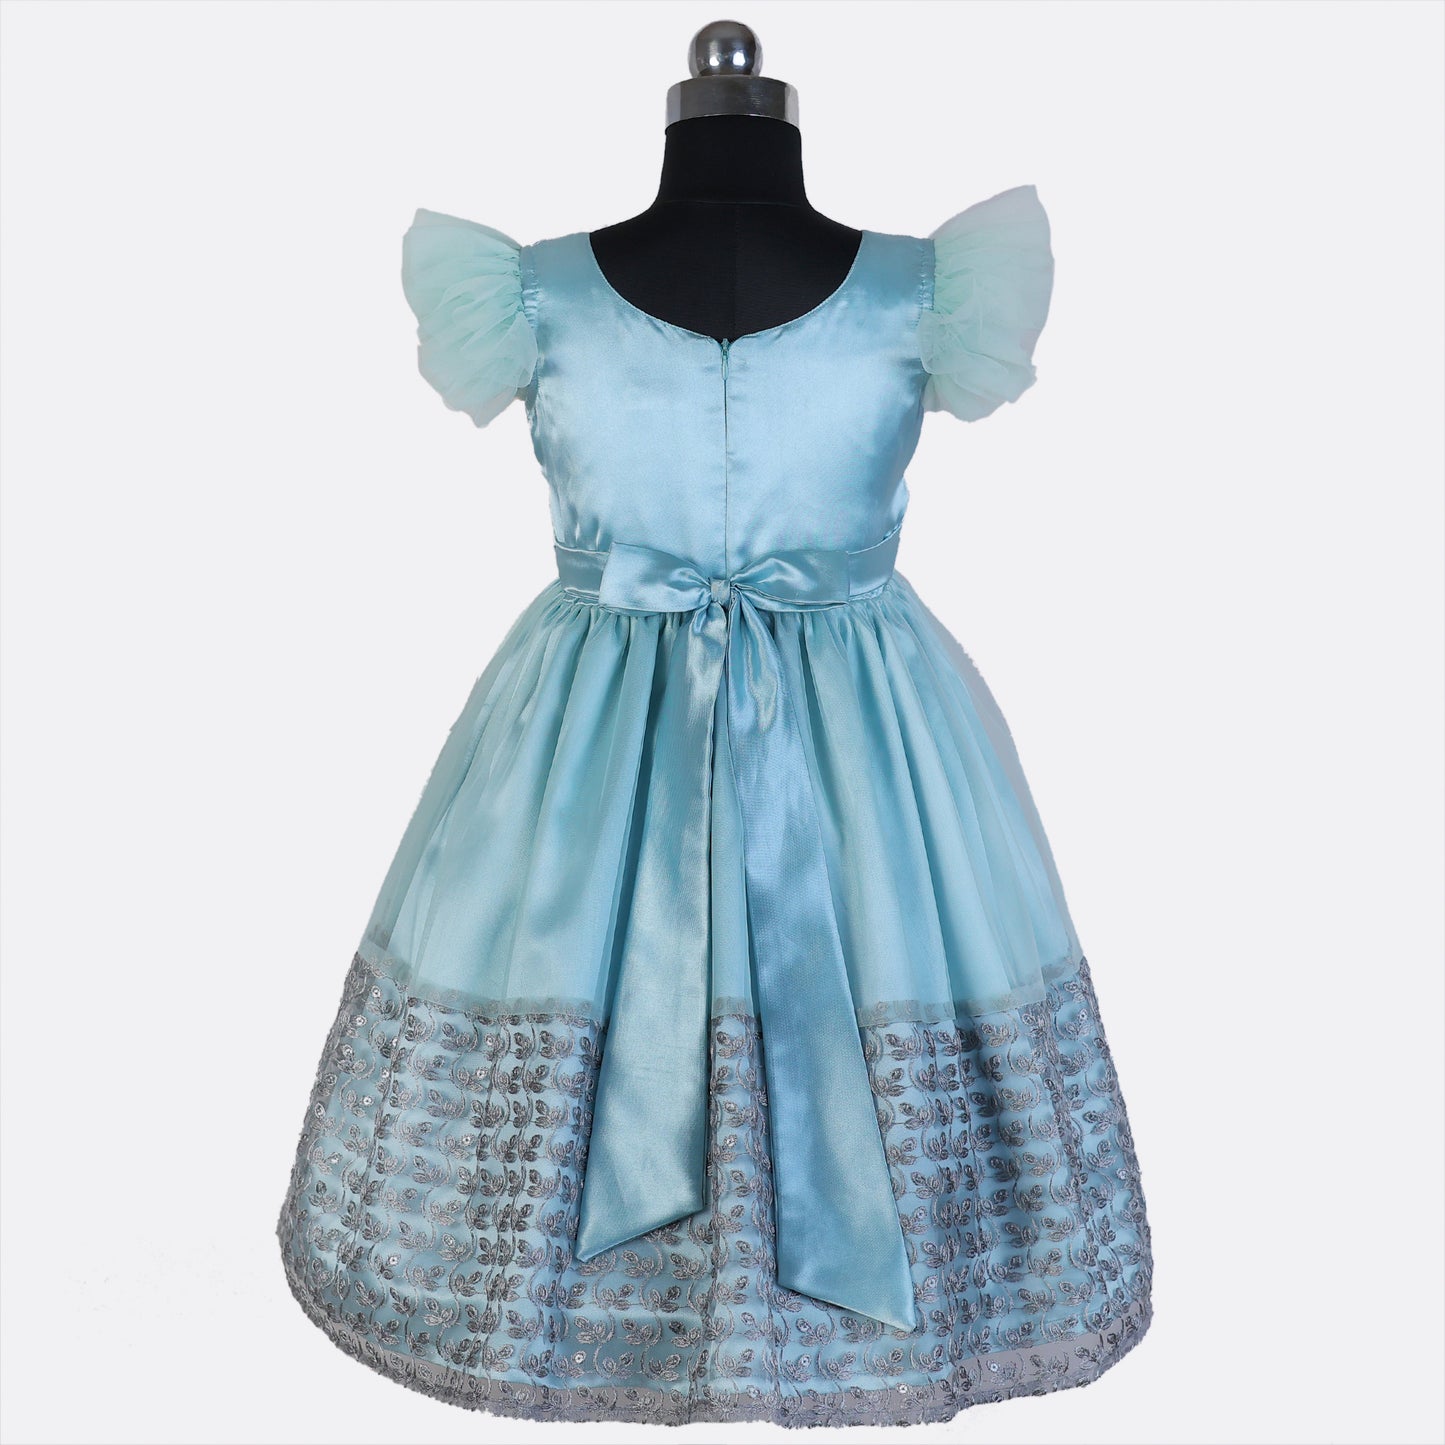 HEYKIDOO clothing girls 9 year old dress stylish comfortable indian kids online sites Knee length frock fashionable unique beautiful blue floral embroidered birthday gown buy online shopping for kids